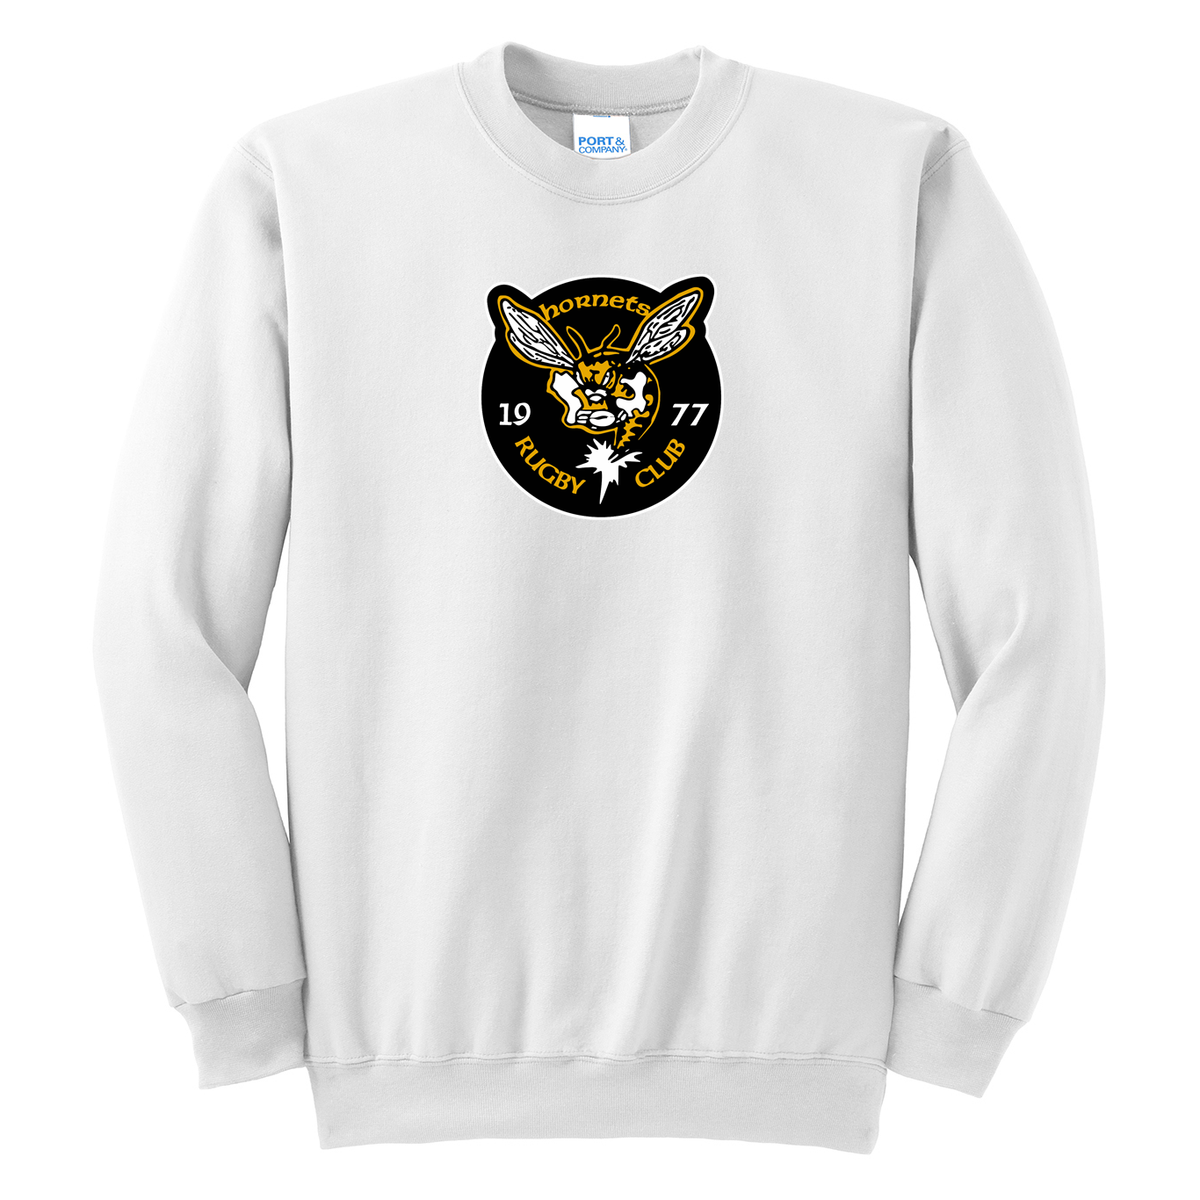 St. Louis Hornets Rugby Club Crew Neck Sweater